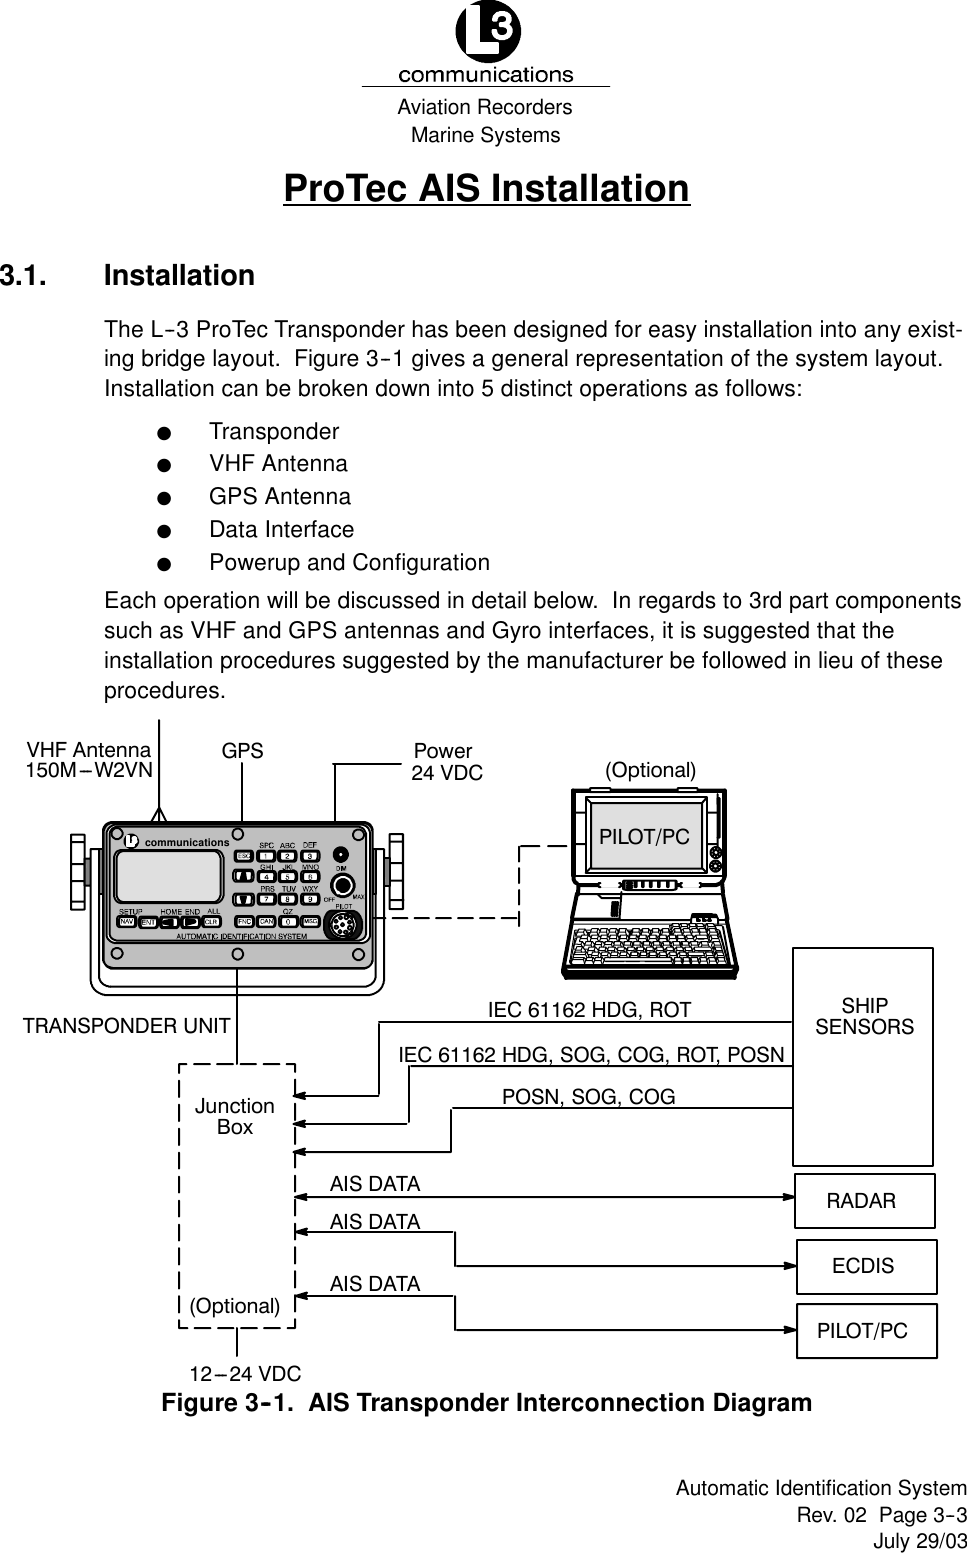 Marine SystemsAviation RecordersRev. 02 Page 3--3July 29/03Automatic Identification SystemProTec AIS Installation3.1. InstallationThe L--3 ProTec Transponder has been designed for easy installation into any exist-ing bridge layout. Figure 3--1 gives a general representation of the system layout.Installation can be broken down into 5 distinct operations as follows:FTransponderFVHF AntennaFGPS AntennaFData InterfaceFPowerup and ConfigurationEach operation will be discussed in detail below. In regards to 3rd part componentssuch as VHF and GPS antennas and Gyro interfaces, it is suggested that theinstallation procedures suggested by the manufacturer be followed in lieu of theseprocedures.JunctionBoxIEC 61162 HDG, ROTTRANSPONDER UNITIEC 61162 HDG, SOG, COG, ROT, POSNPOSN,SOG,COGSHIPSENSORS(Optional)RADARECDISPILOT/PCAIS DATAAIS DATAAIS DATAVHF Antenna150M---W2VNGPS24 VDCPowerPILOT/PC12---24 VDC(Optional)communicationsFigure 3--1. AIS Transponder Interconnection Diagram